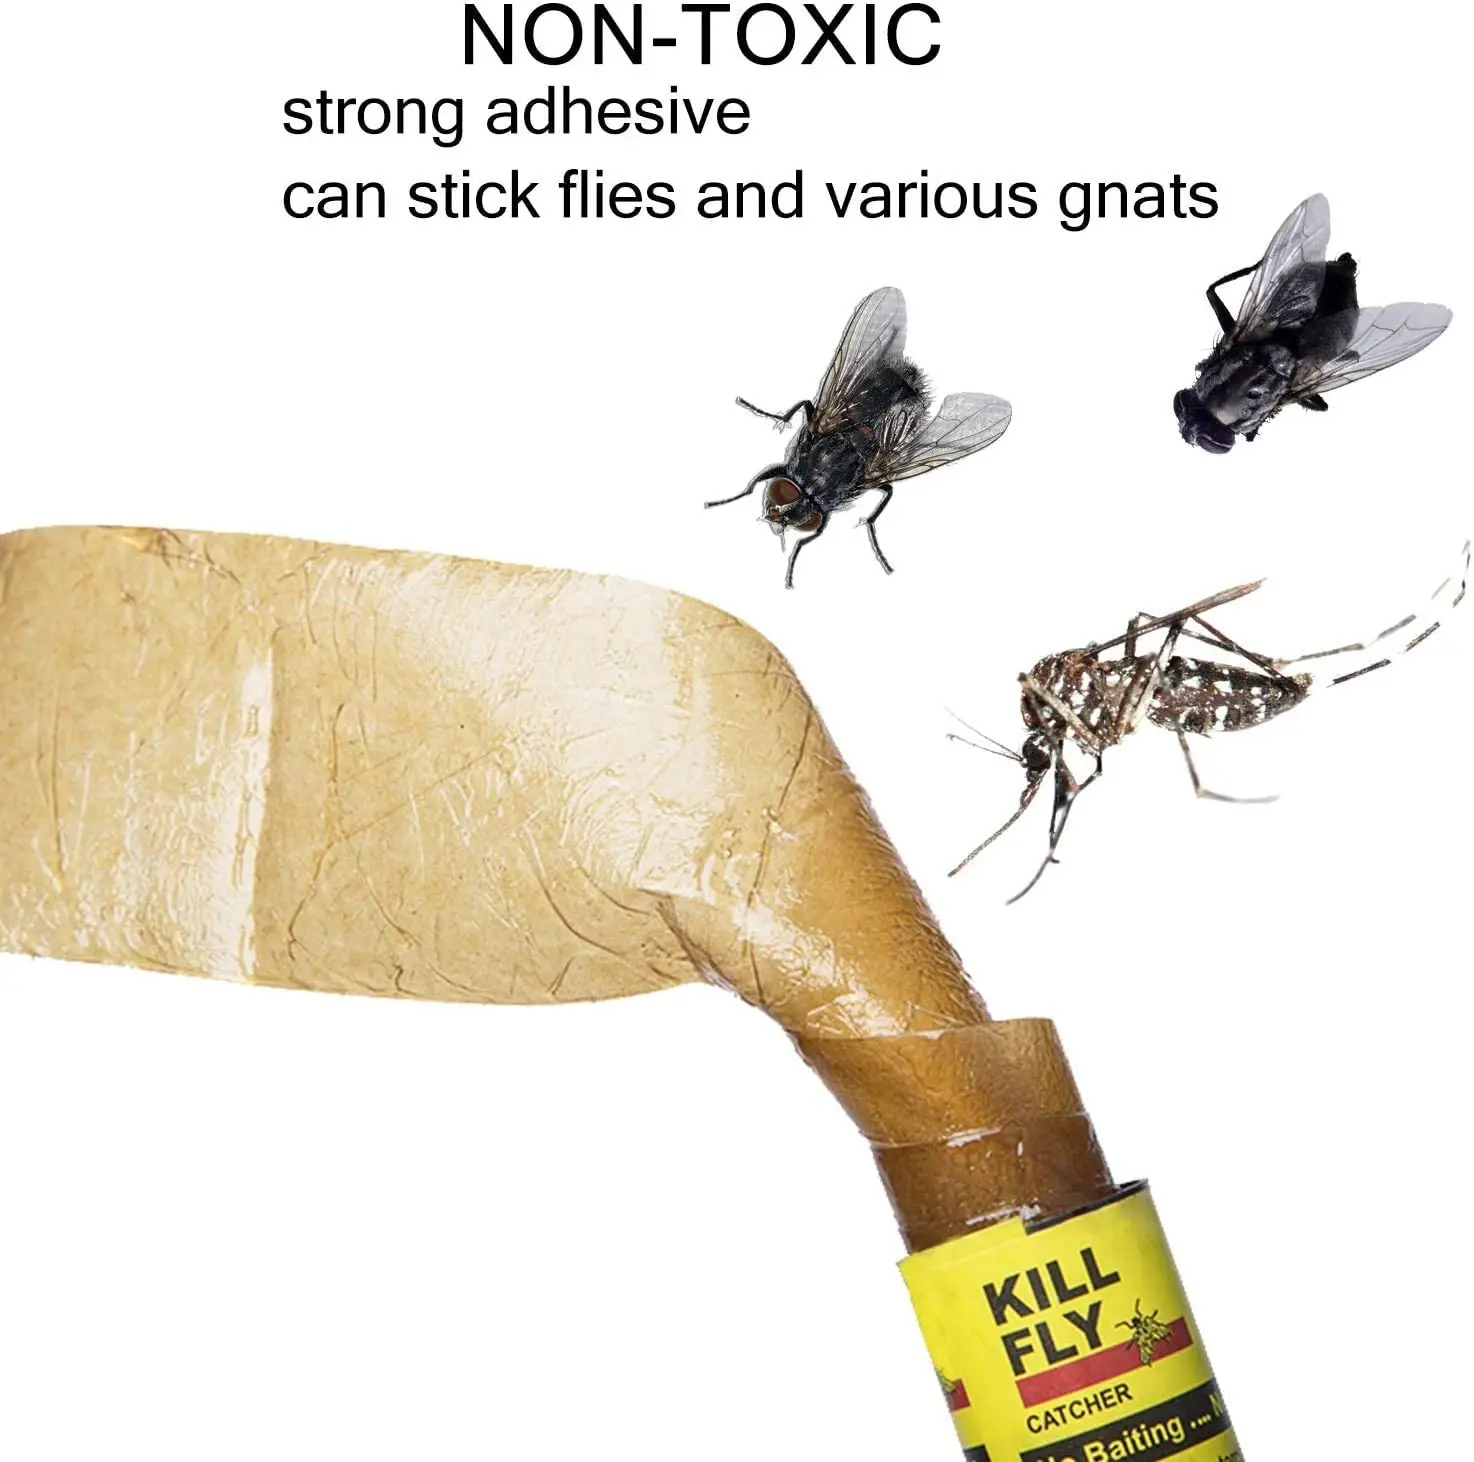 https://ae01.alicdn.com/kf/Hae1ce59152cd4ec9830825fbb1101512G/8-32pcs-Fly-Glue-Trap-Powerful-Mosquito-Fly-Killer-Rolls-Sticky-Fly-Paper-Eliminate-Flies-Insect.jpg